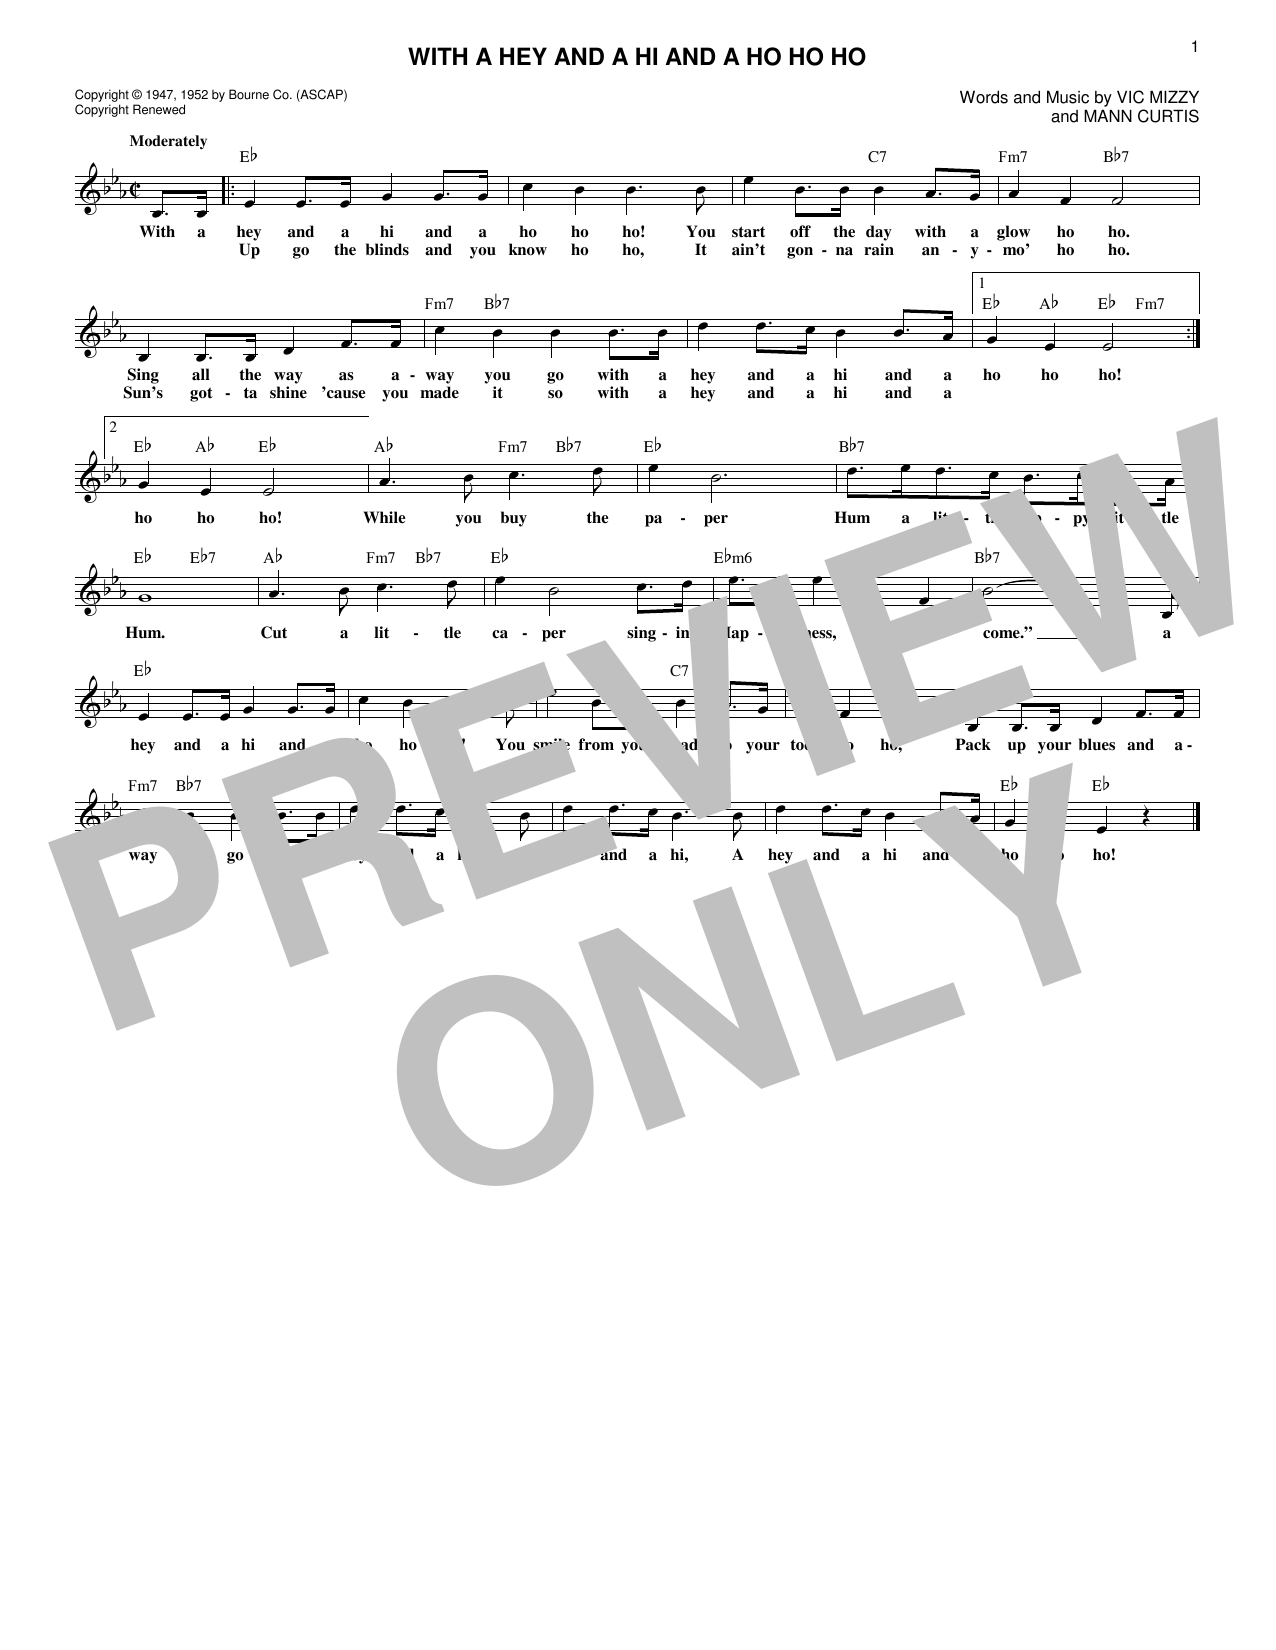 Download Mann Curtis With A Hey And A Hi And A Ho Ho Ho Sheet Music